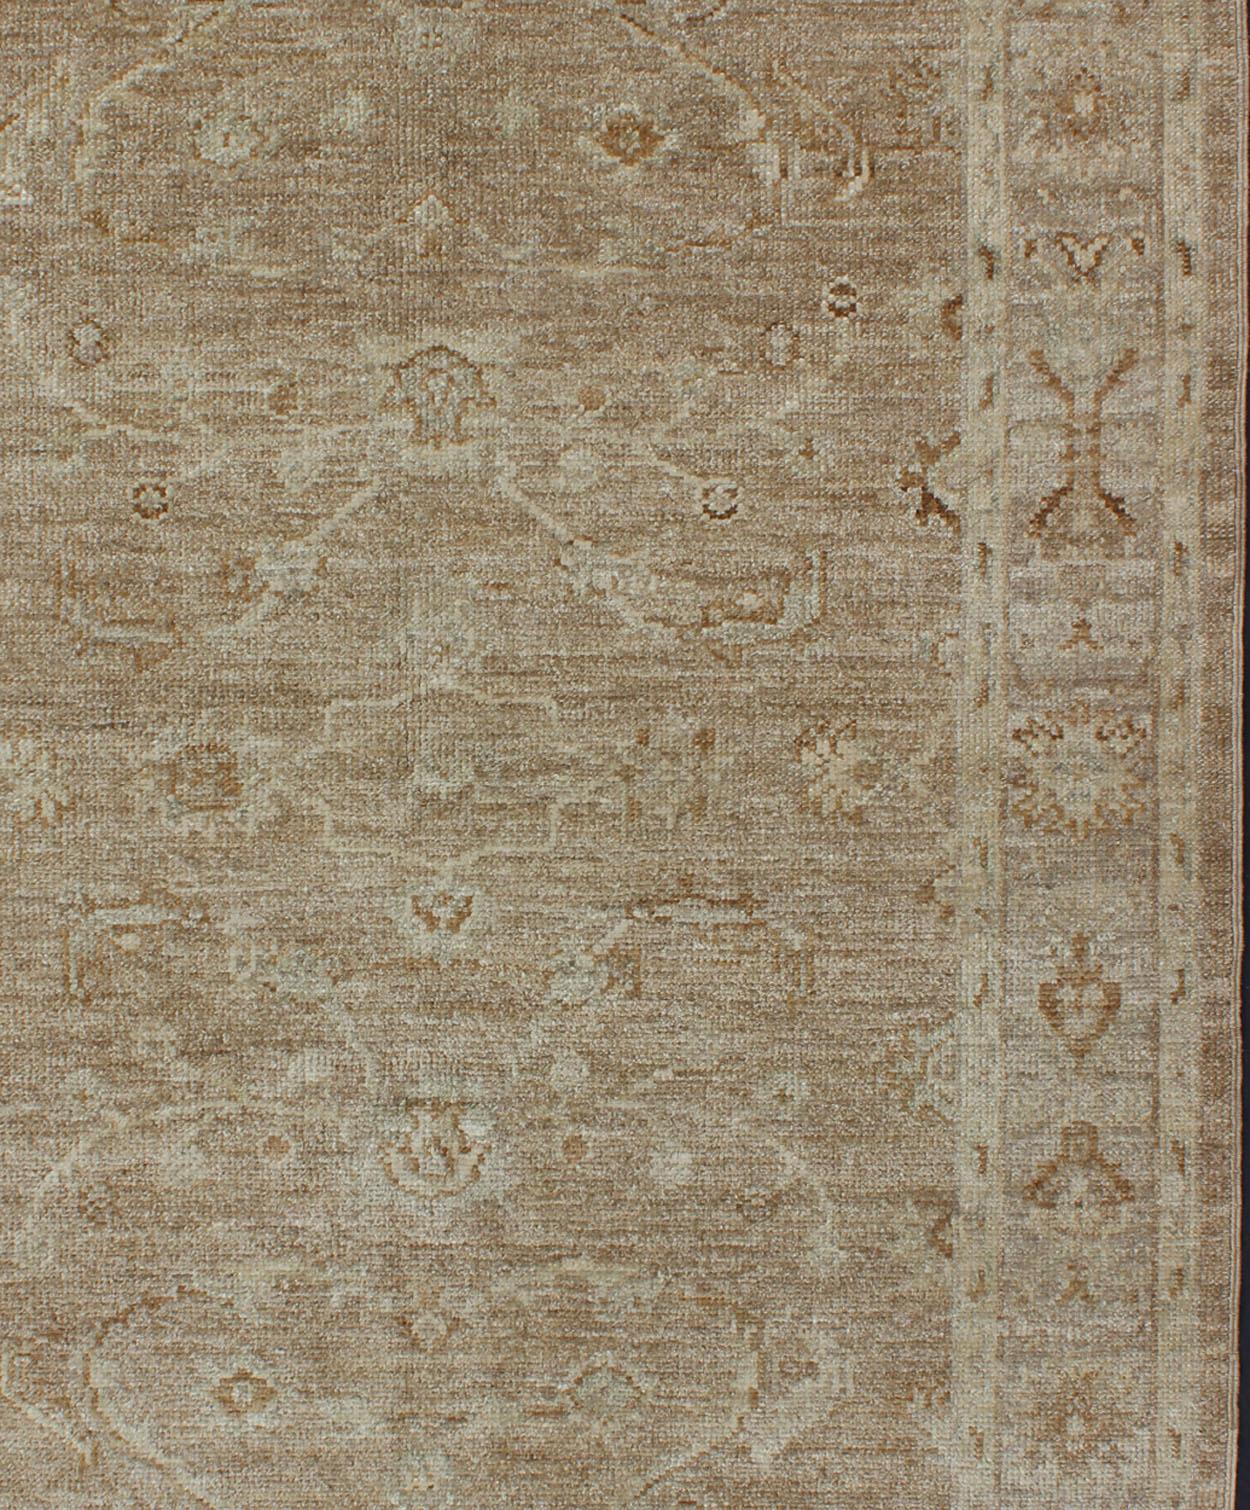 Keivan Woven Arts Angora Oushak Turkish Rug in Warm Colors of Taupe and Tan Keivan Woven Arts Angora Oushak / rug AN-125623, country of origin / type: Turkey 
Measures: 4'1 x 5'8
This beautiful taupe color Oushak is made with a combination of angora